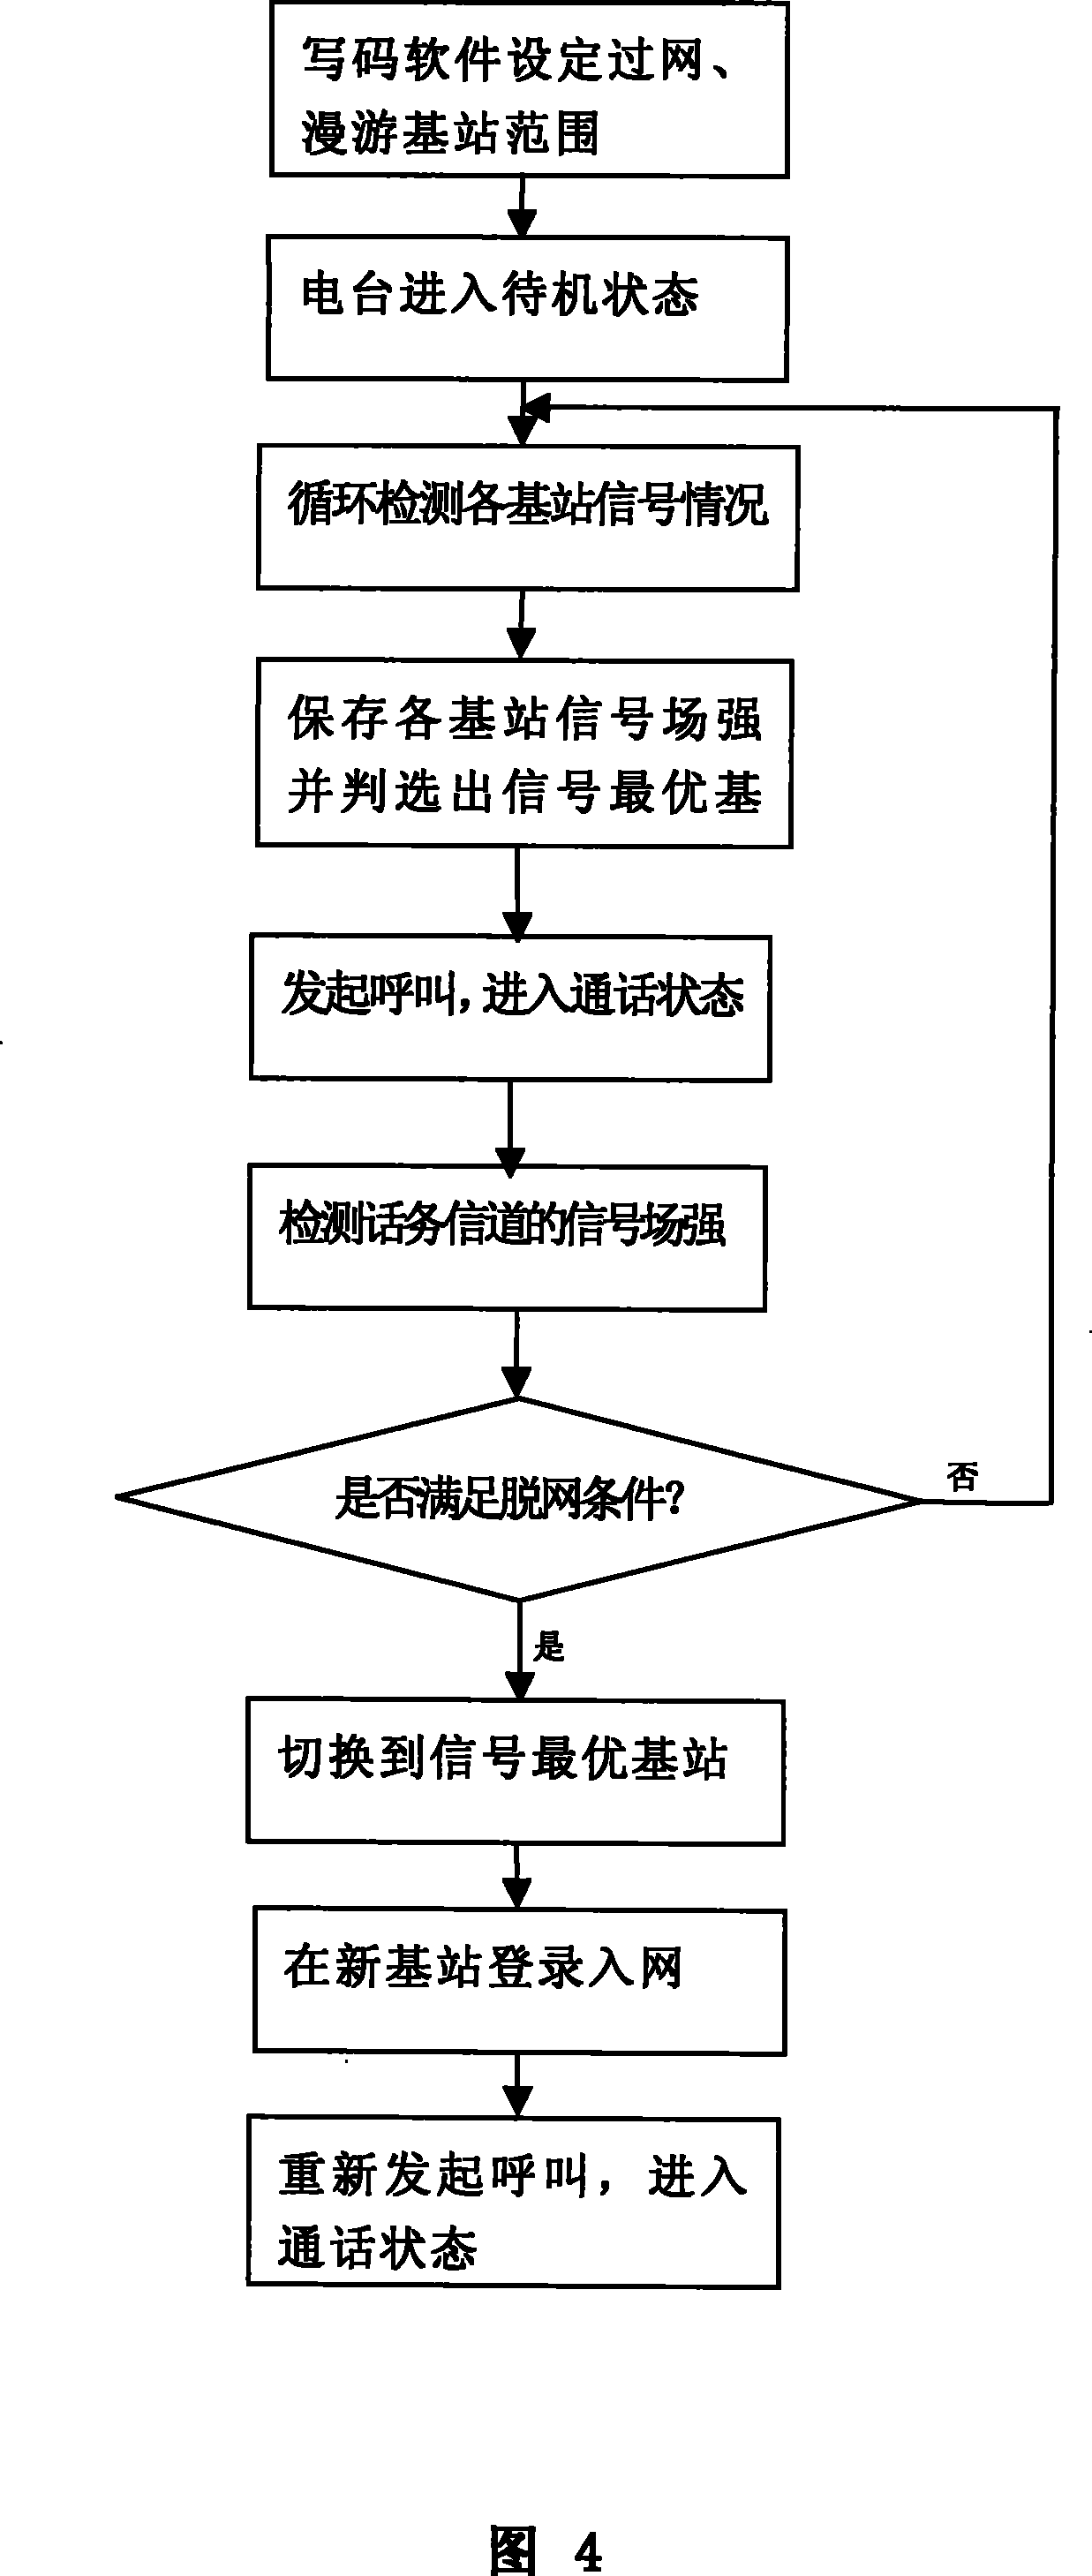 Method for implementing cross base station automatic network passing by MPT-1327 cluster communication system